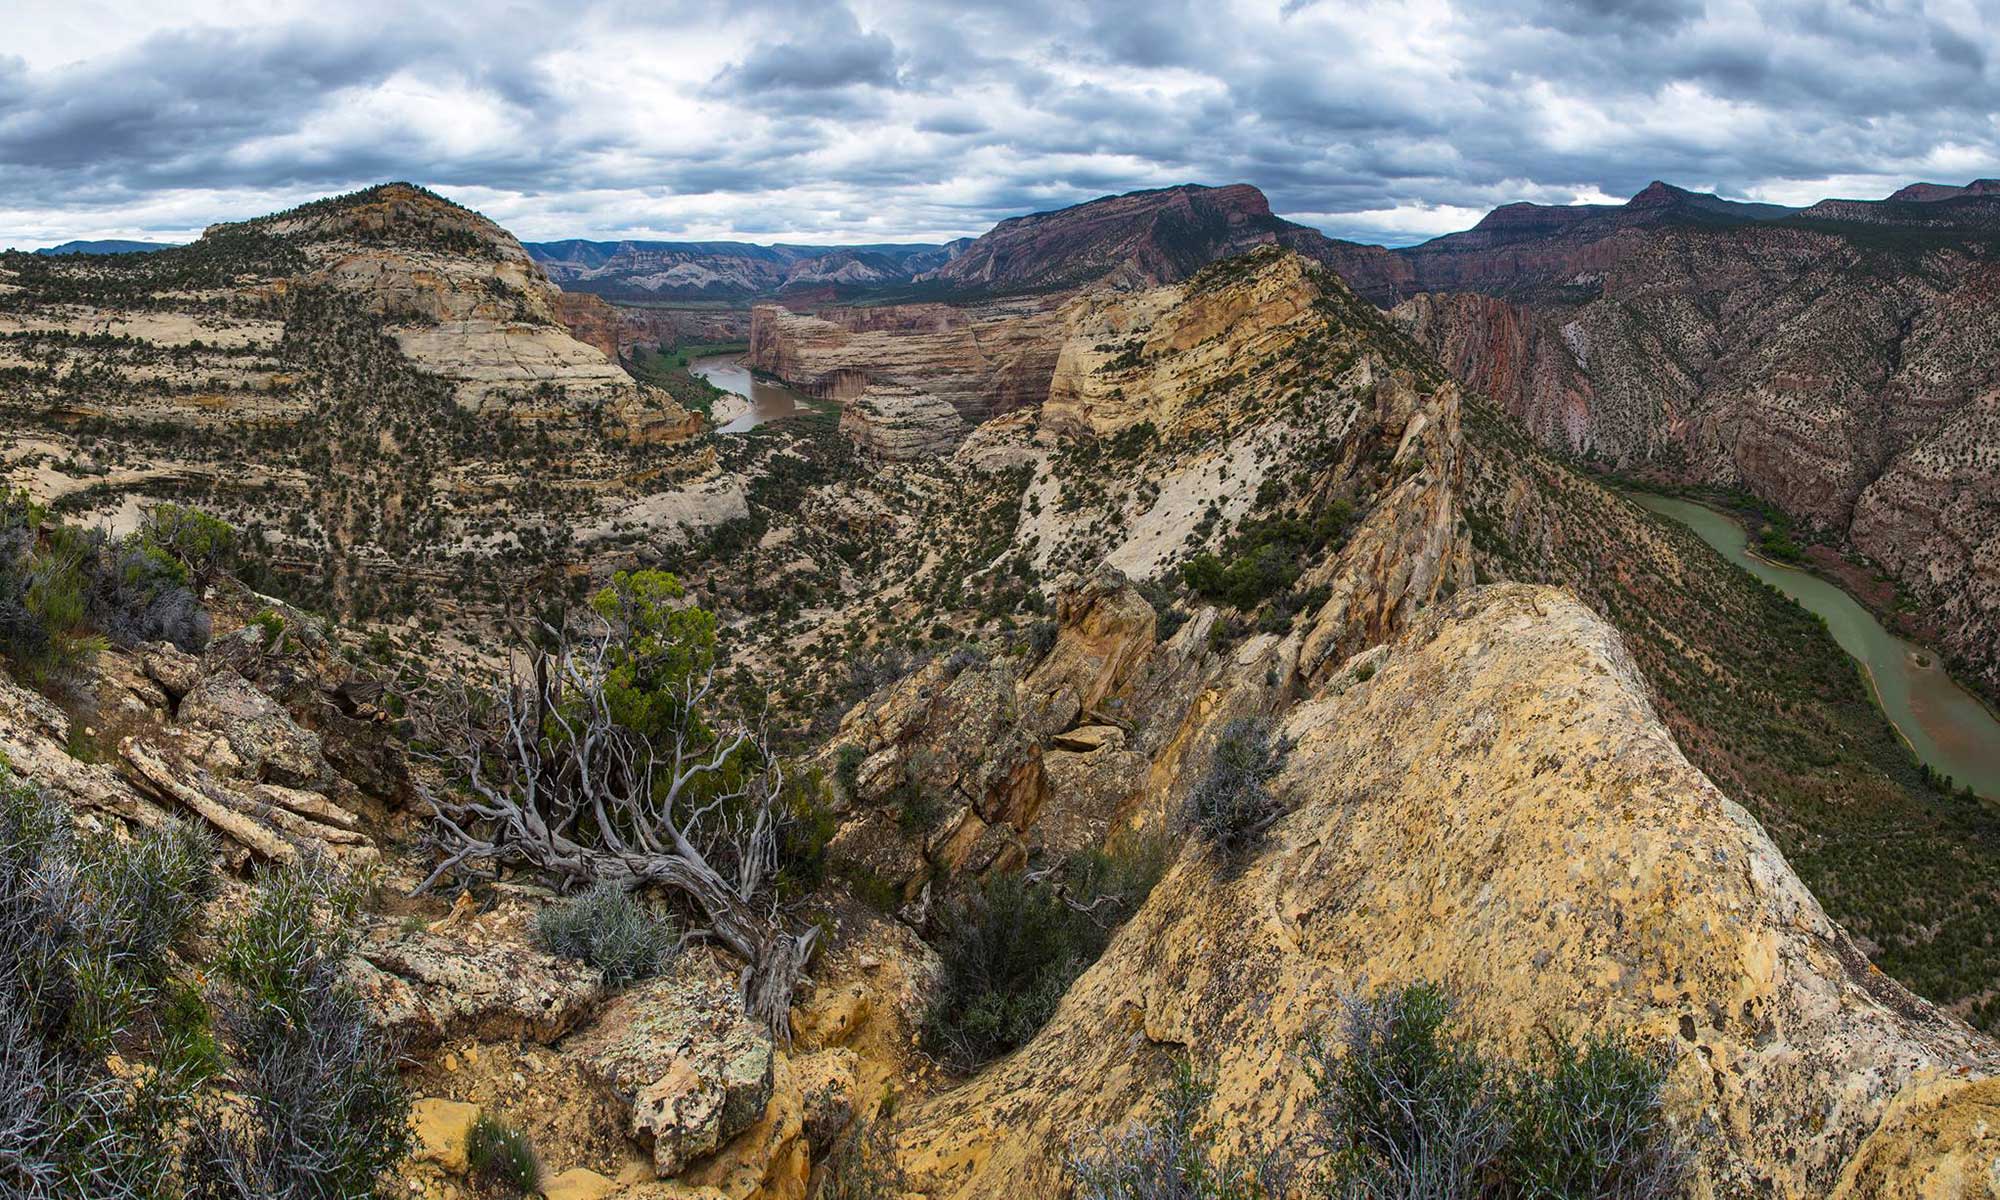 Above the confluence of the Green and Yampa Rivers | Photo by Jacob W. Frank